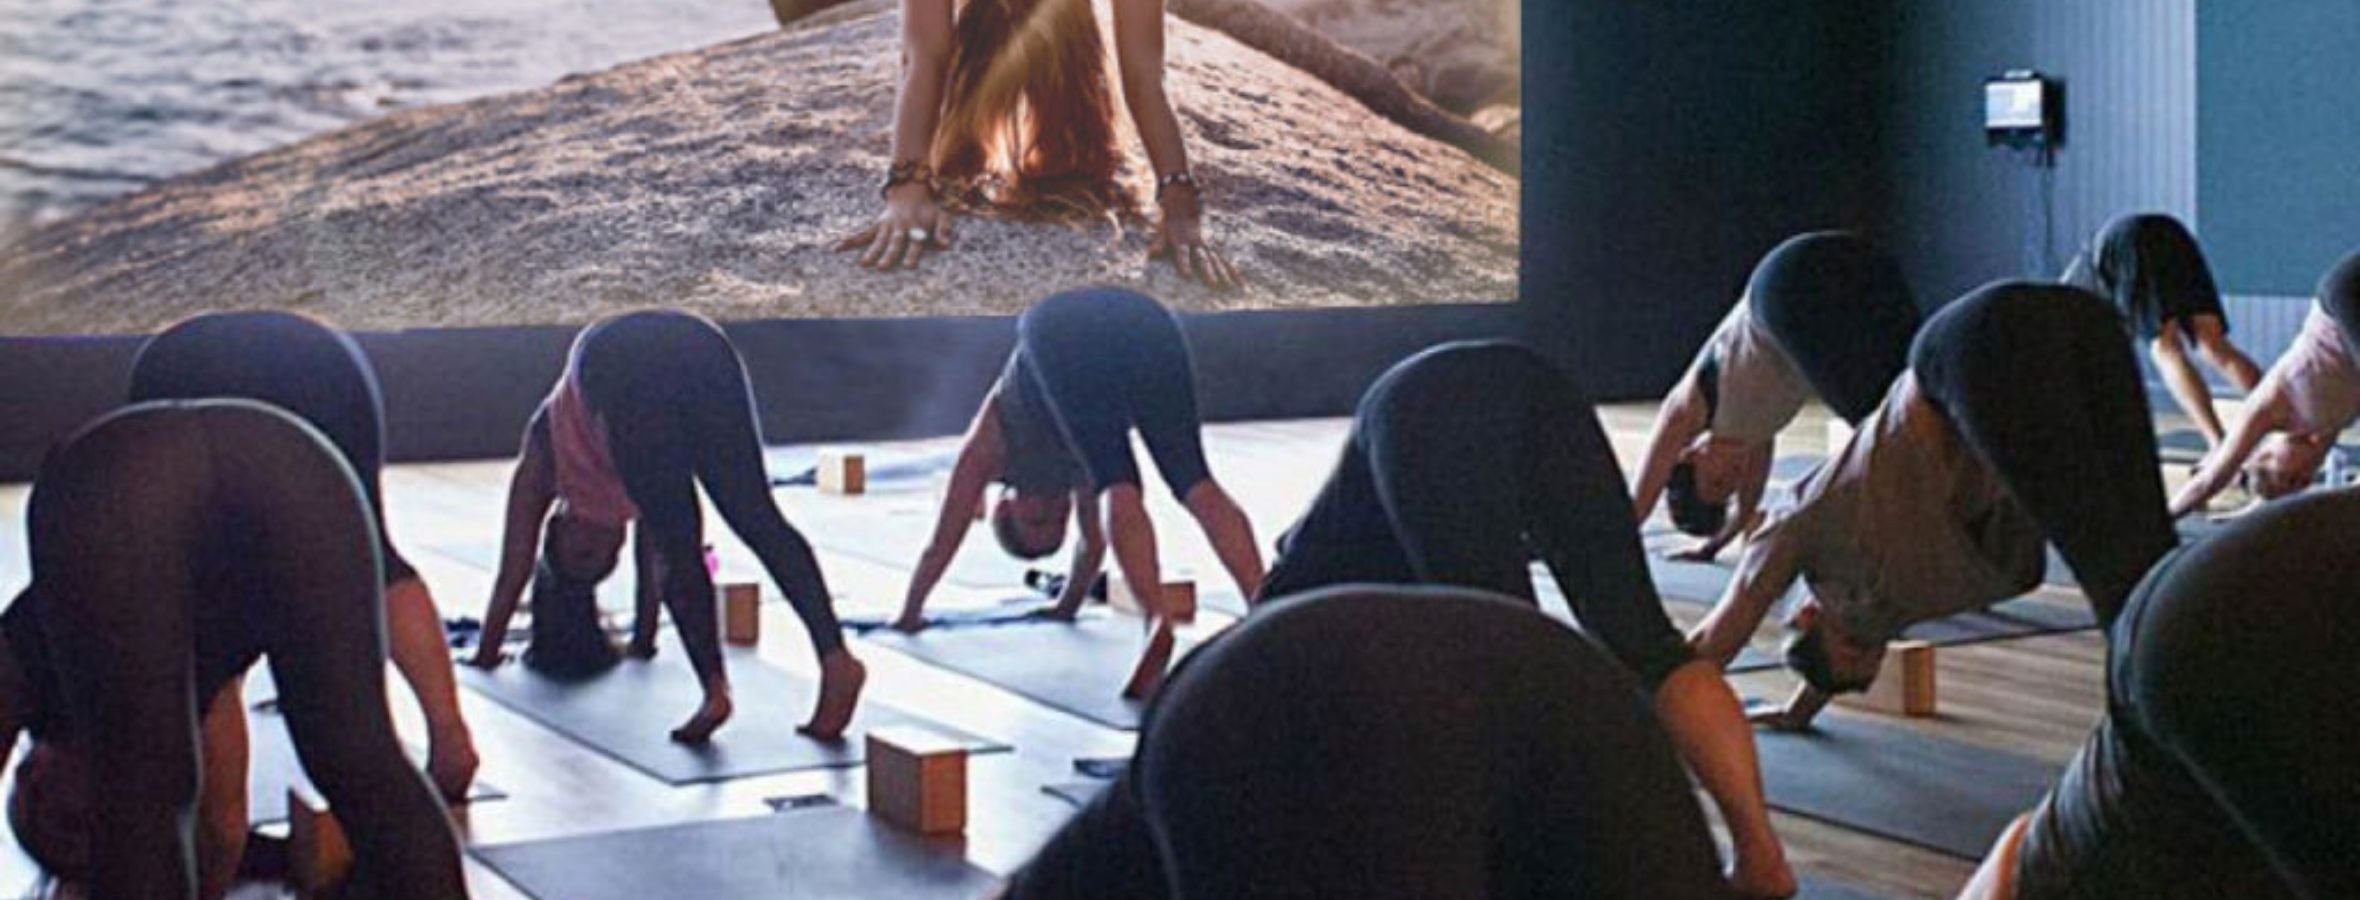 A virtual Yoga class in front of a large video wall displaying the class content